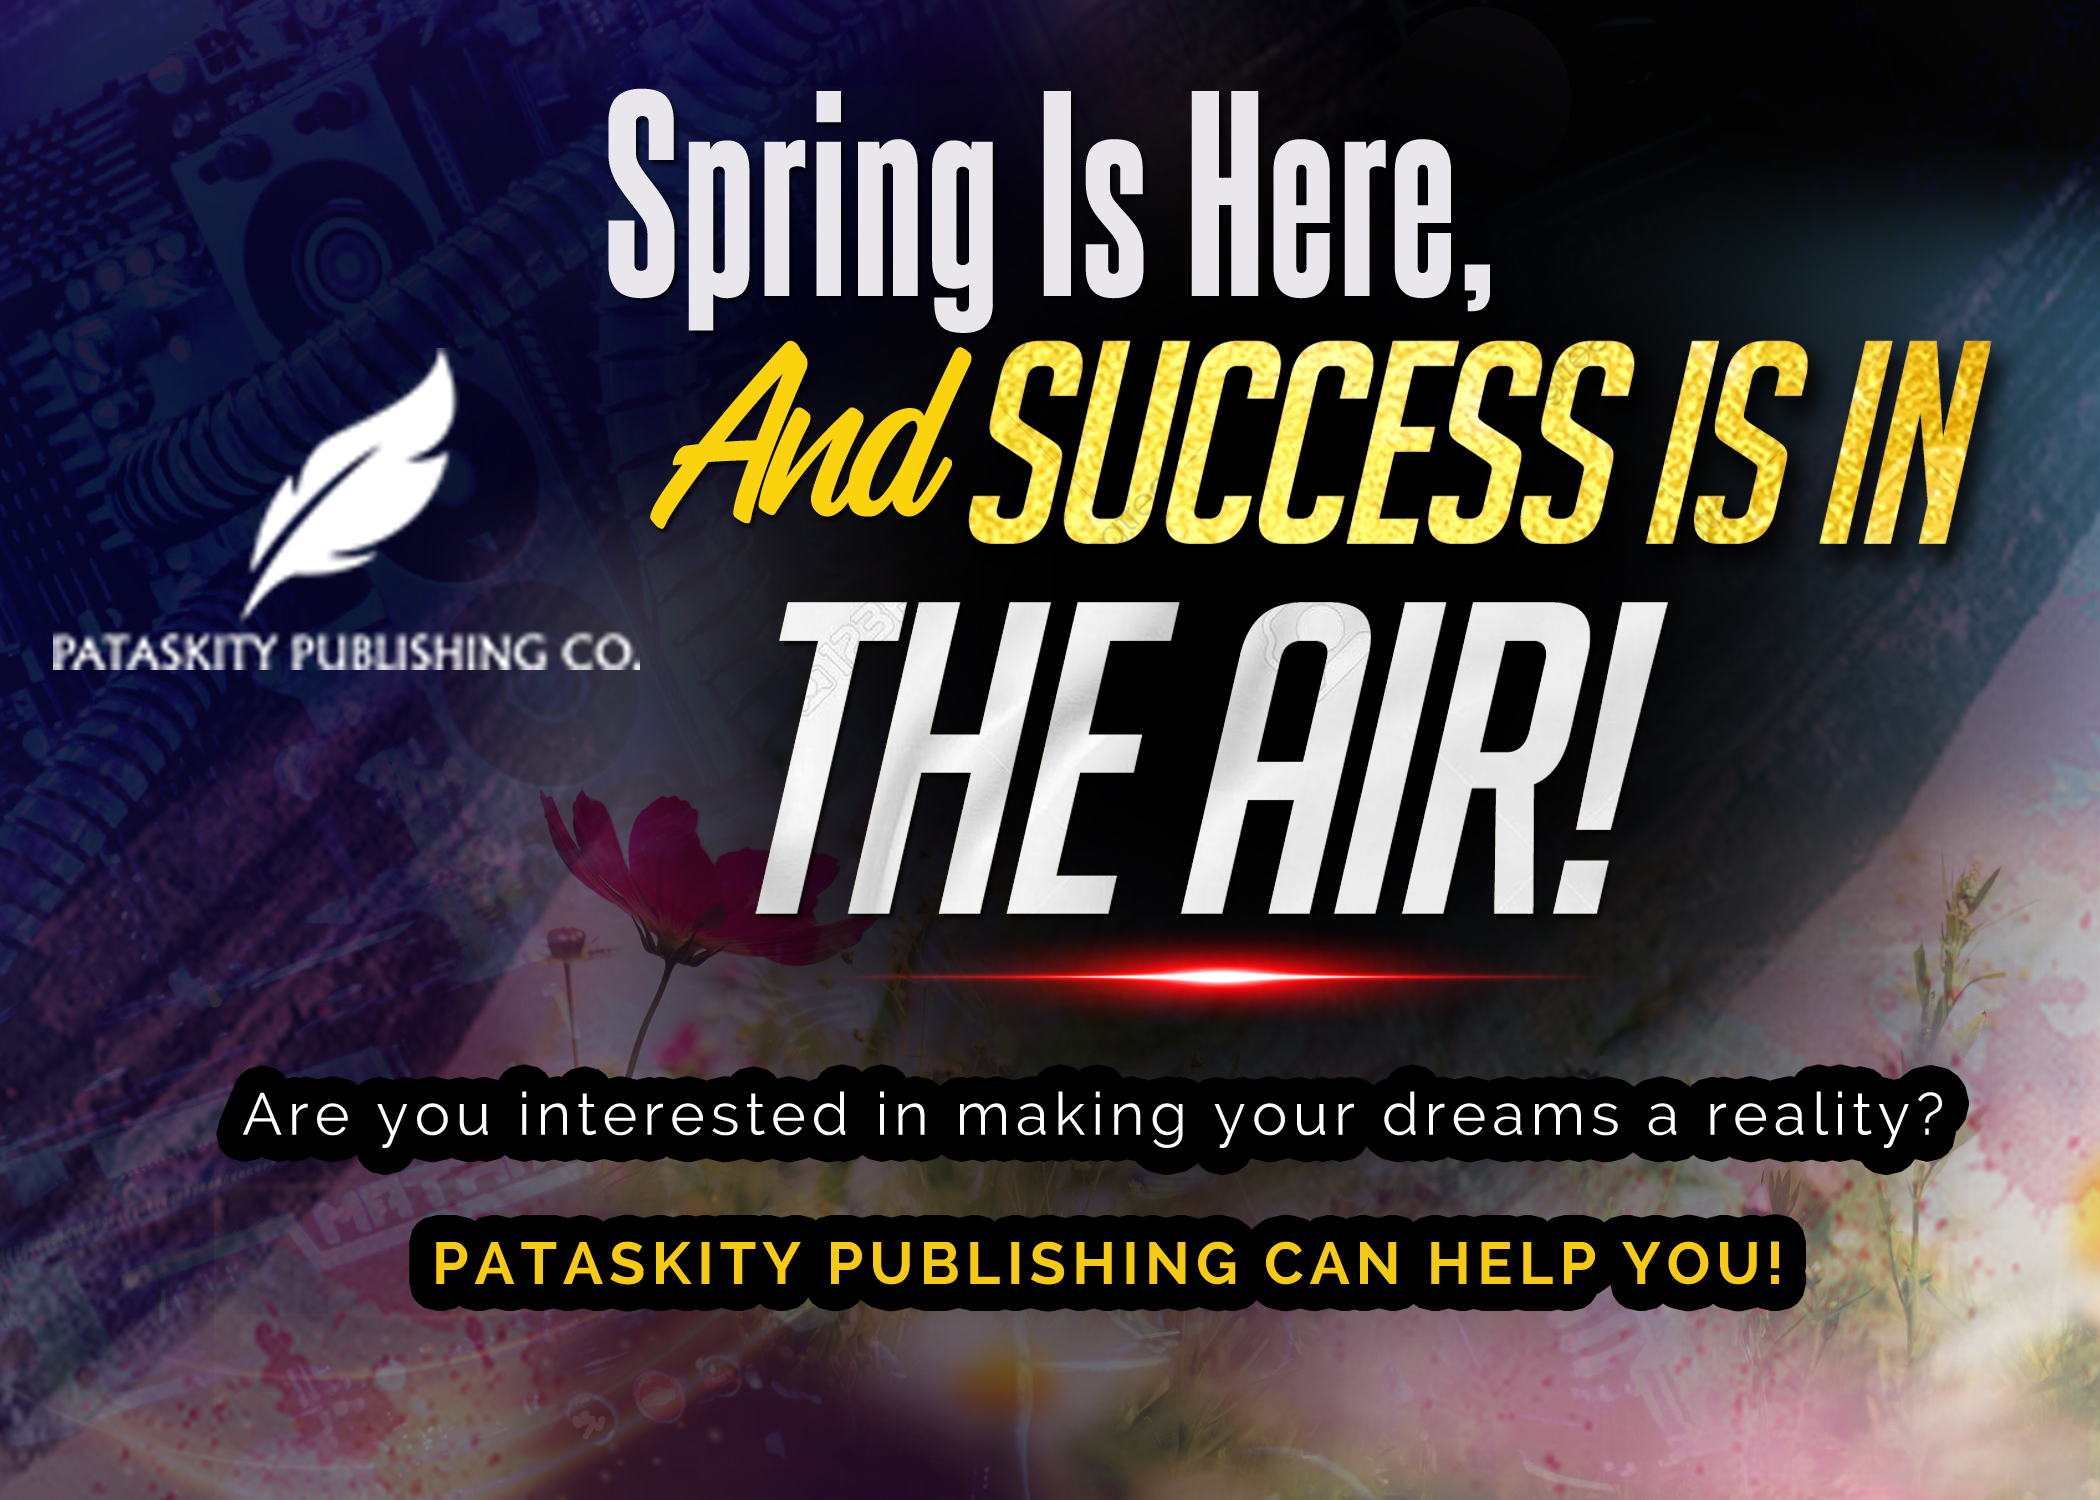 Spring Is Here, and Success Is In The Air!